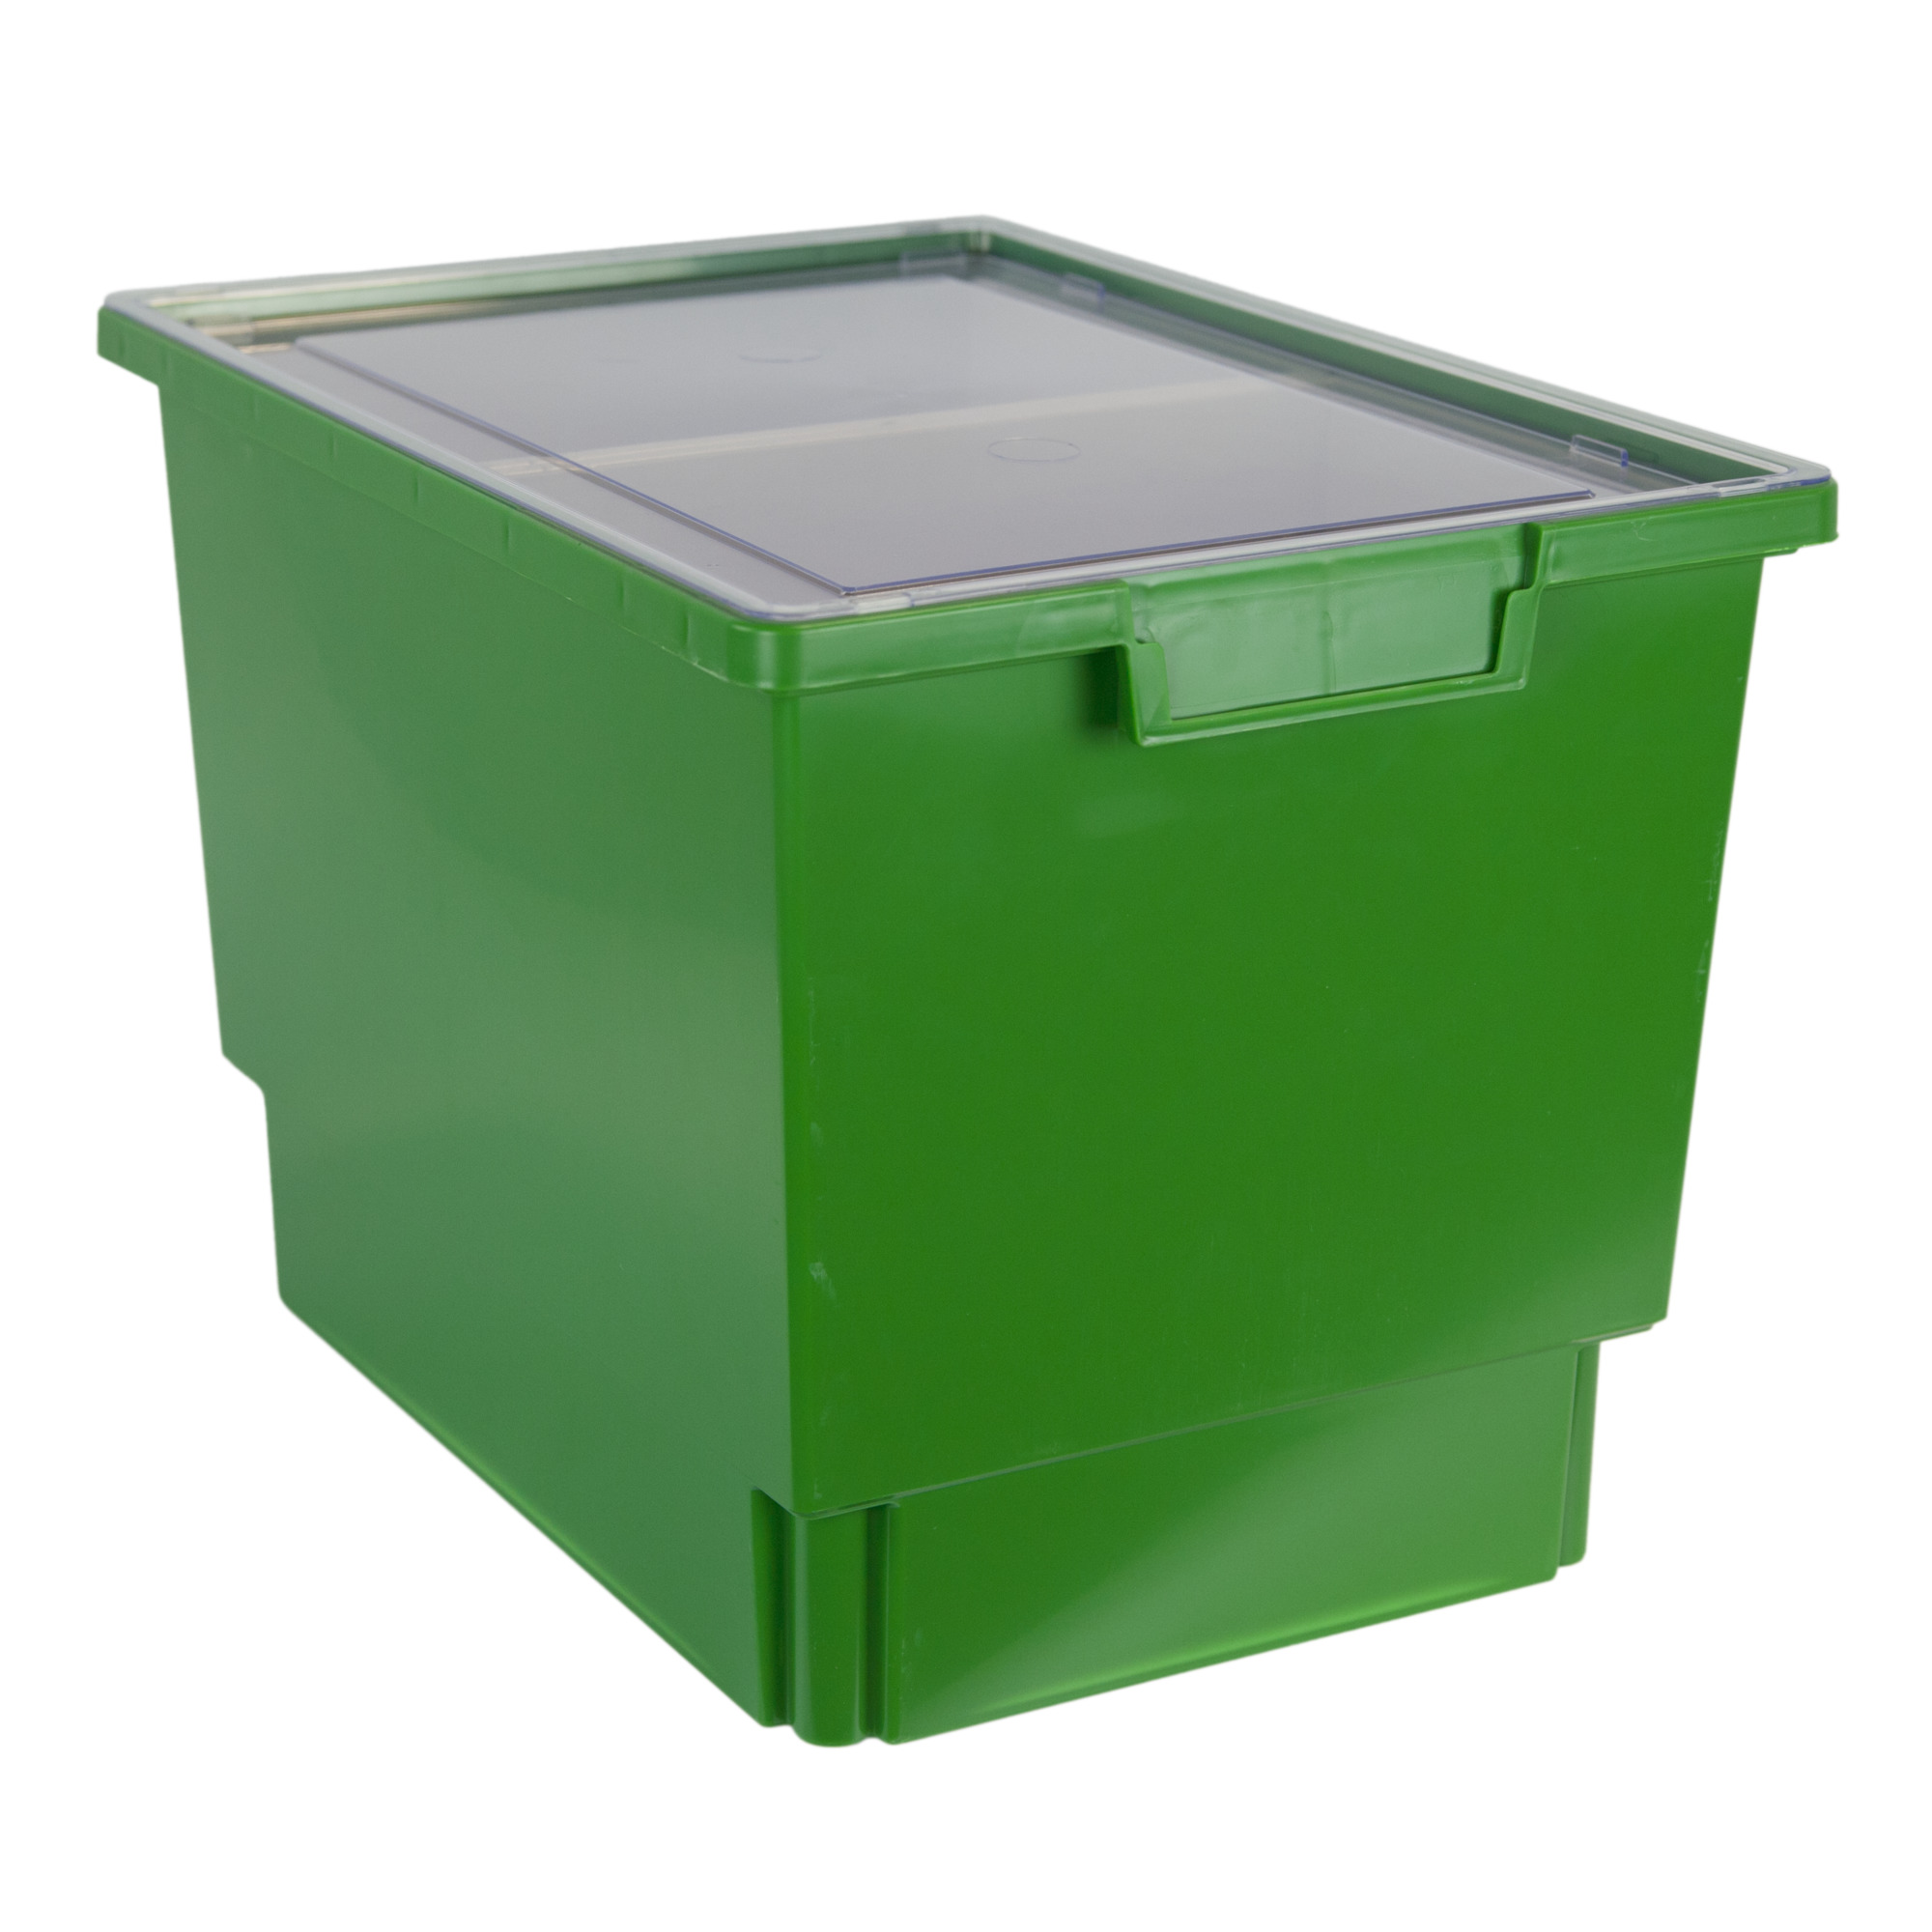 Certwood StorWerks, Slim Line 12Inch Tray Kit (2 x Divisions) Green-3PK, Included (qty.) 3, Material Plastic, Height 12 in, Model CE1954PG-NK0404-3